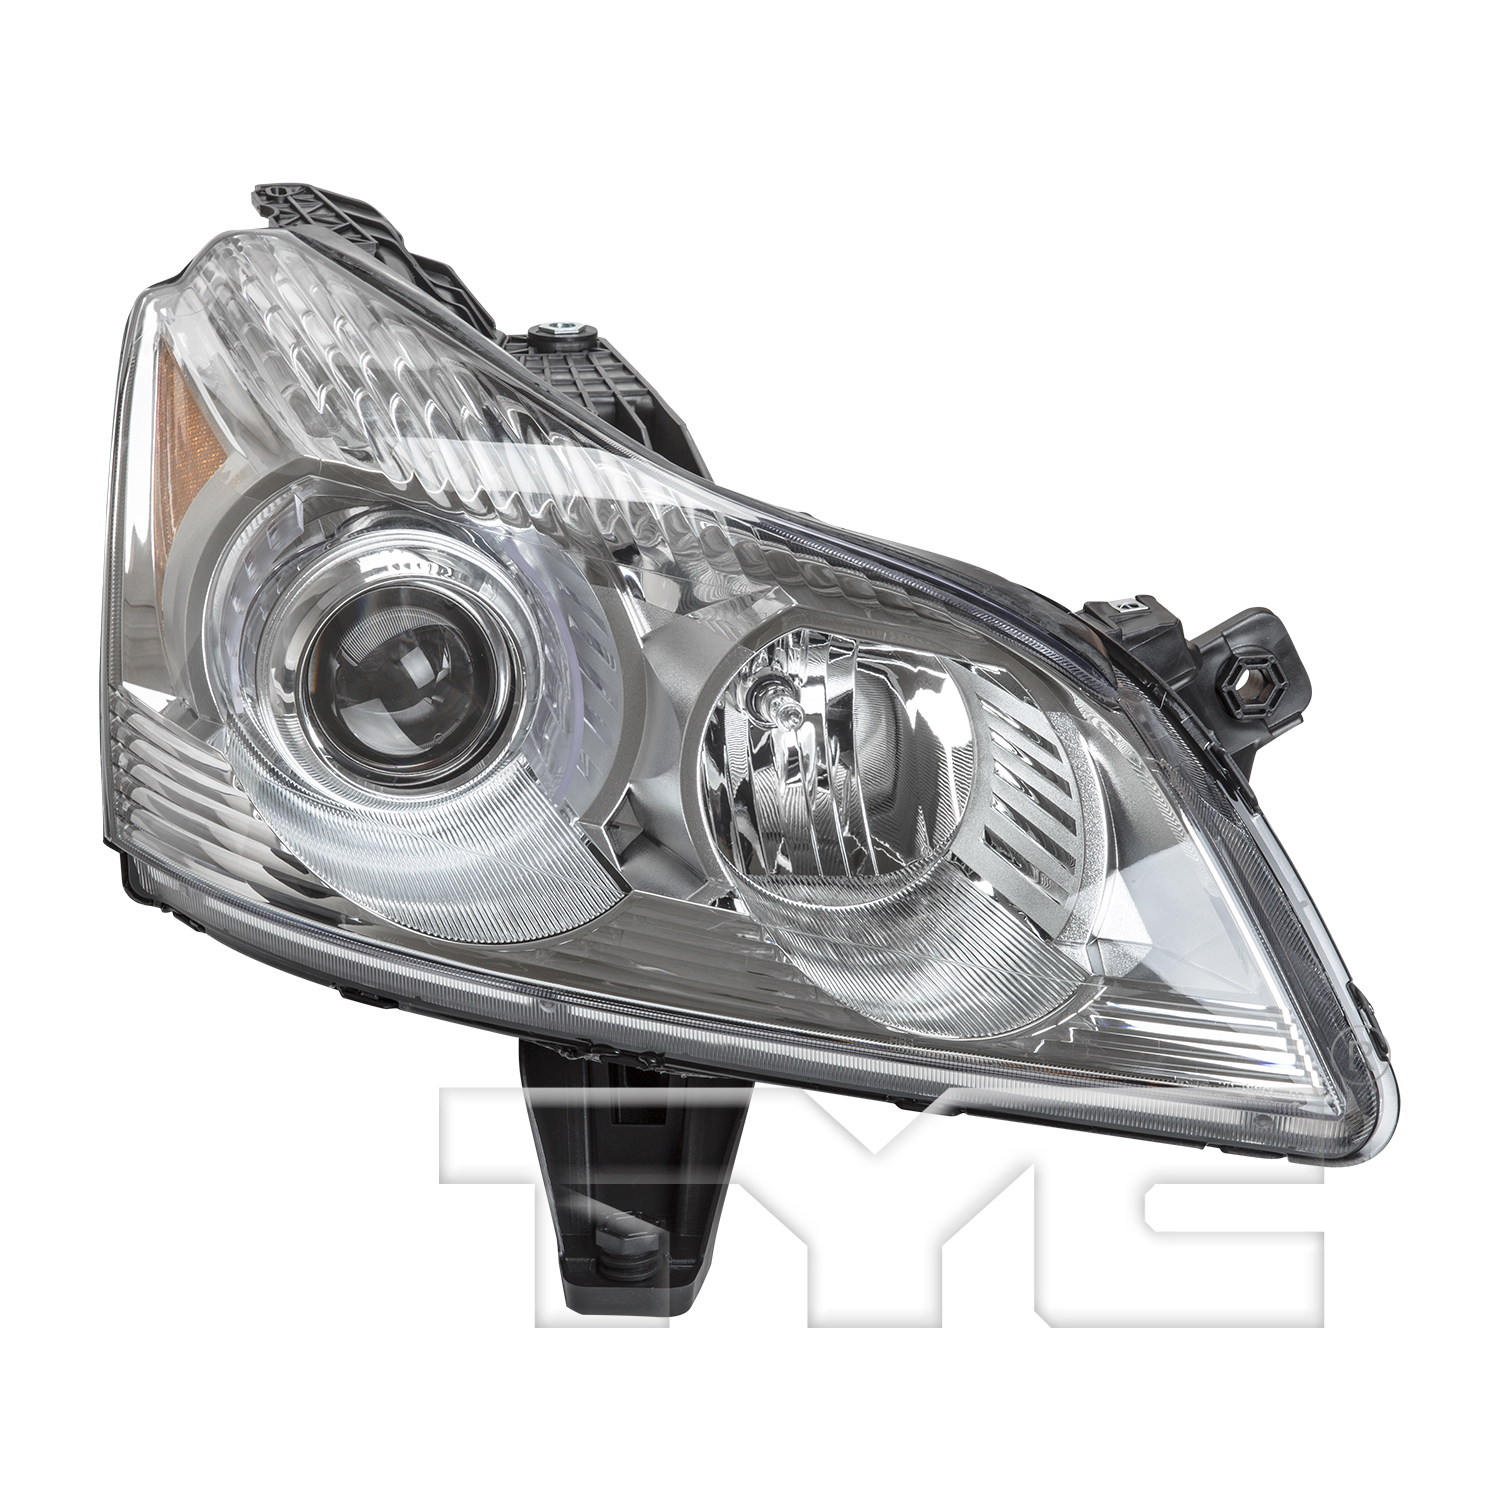 Aftermarket HEADLIGHTS for CHEVROLET - TRAVERSE, TRAVERSE,09-10,RT Headlamp assy composite